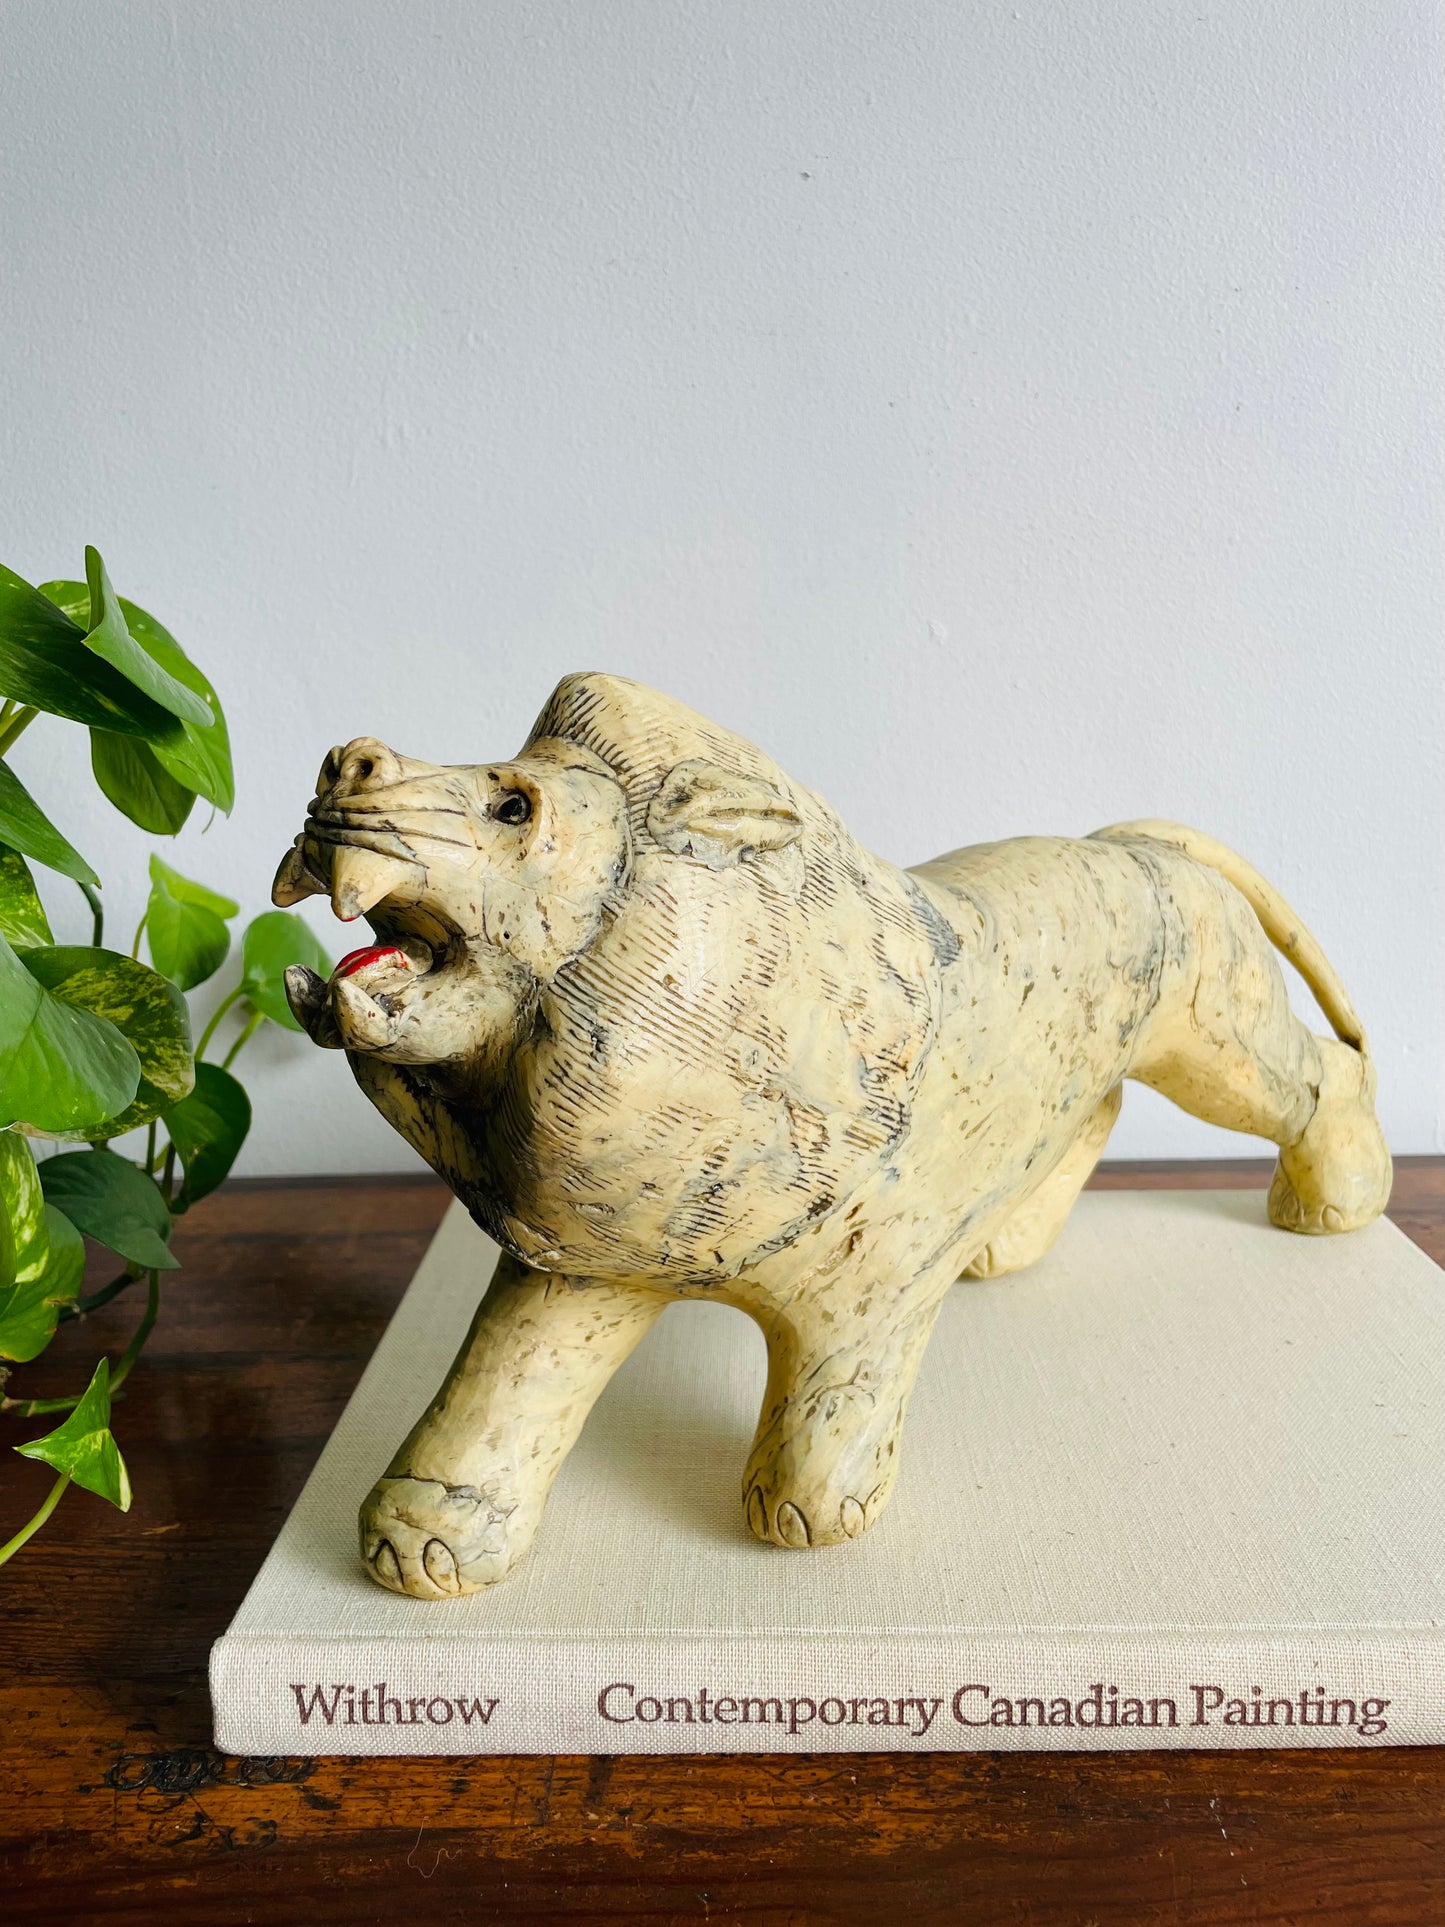 Handmade Roaring Lion Statue Figurine Made from Crushed Oyster Shells